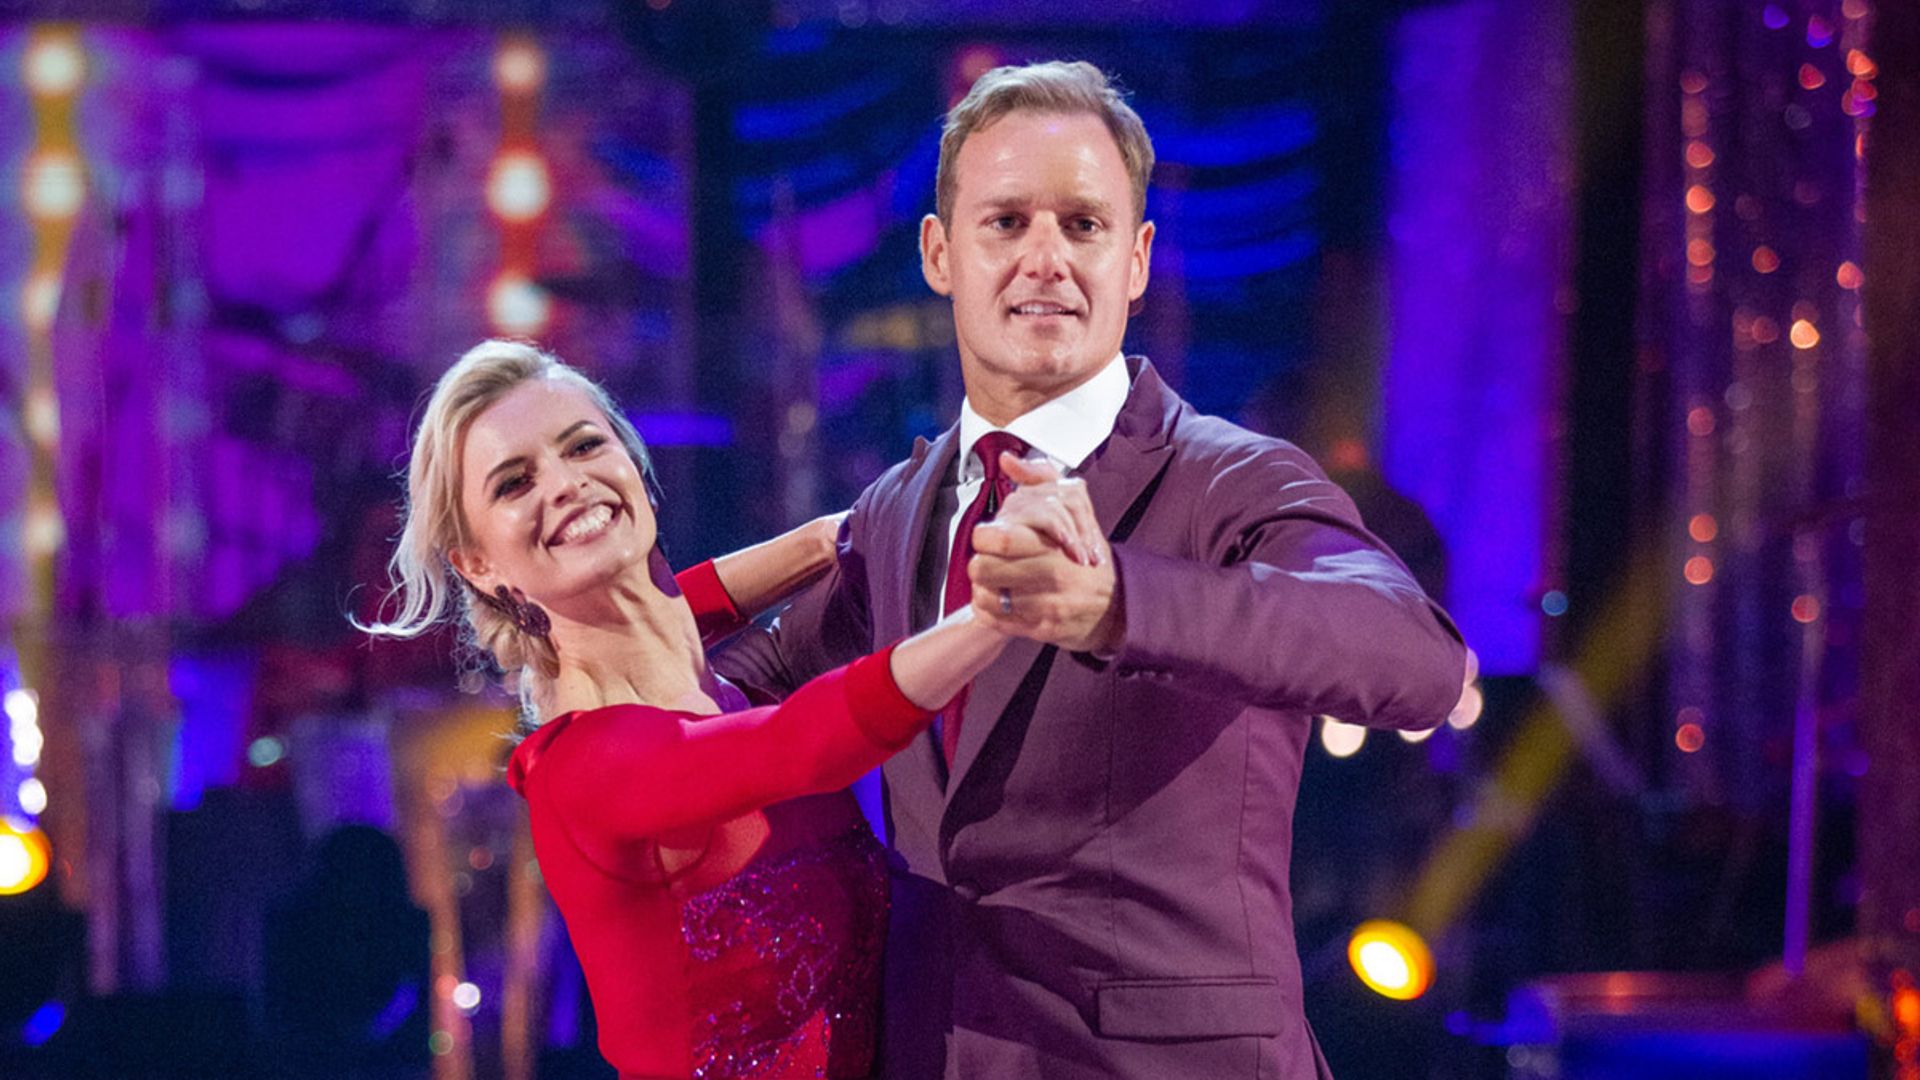 Dan Walker breaks silence on Strictly positive COVID tests - and reveals daughter's reaction to first dance